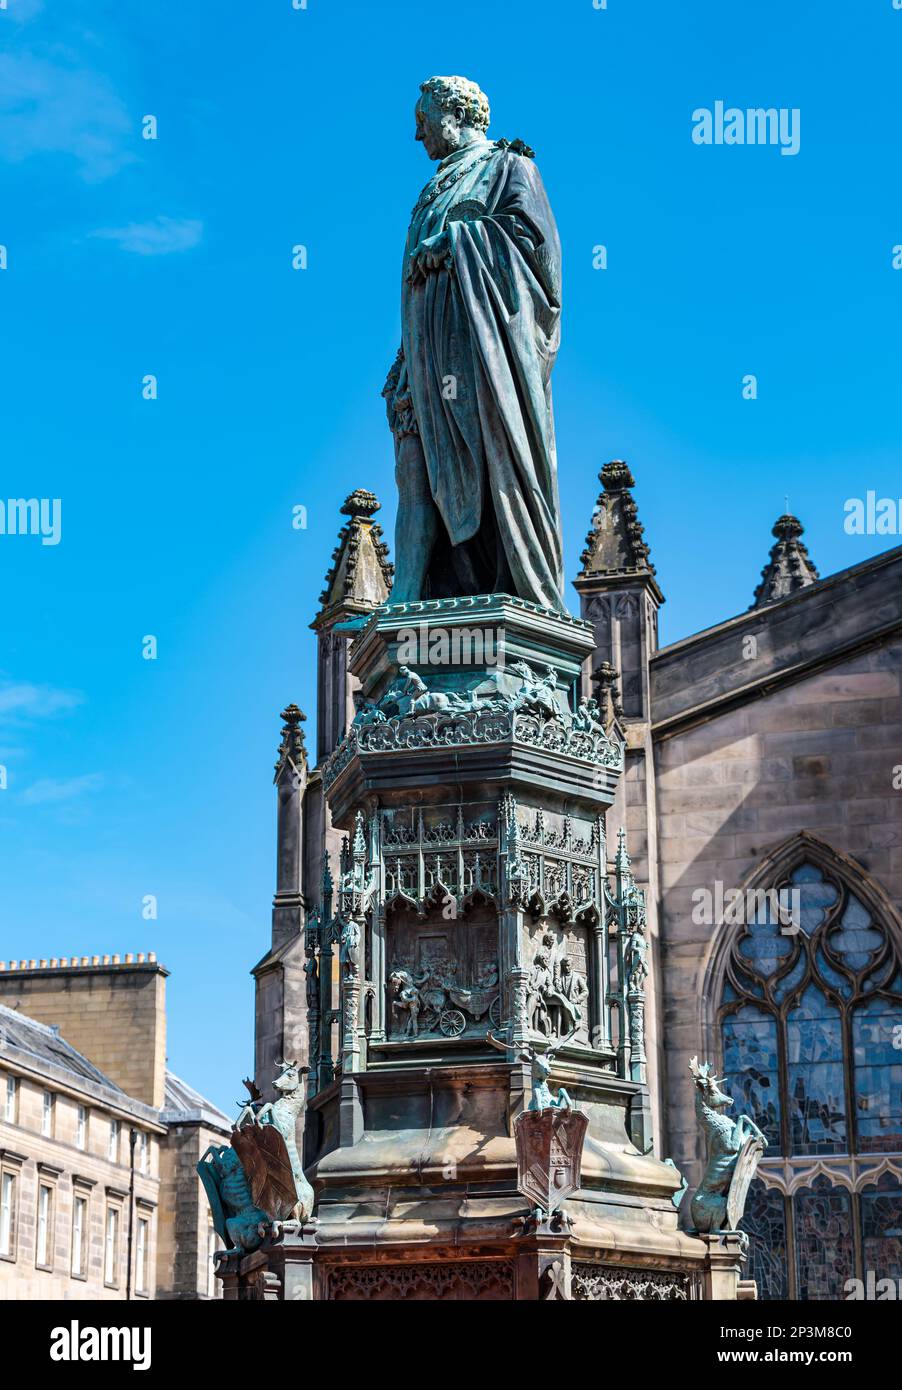 Statue of 5th Duke of Bucclech by St Giles Cathedral, Parliament Square, Royal Mile, Edinburgh, Scotland, UK Stock Photo